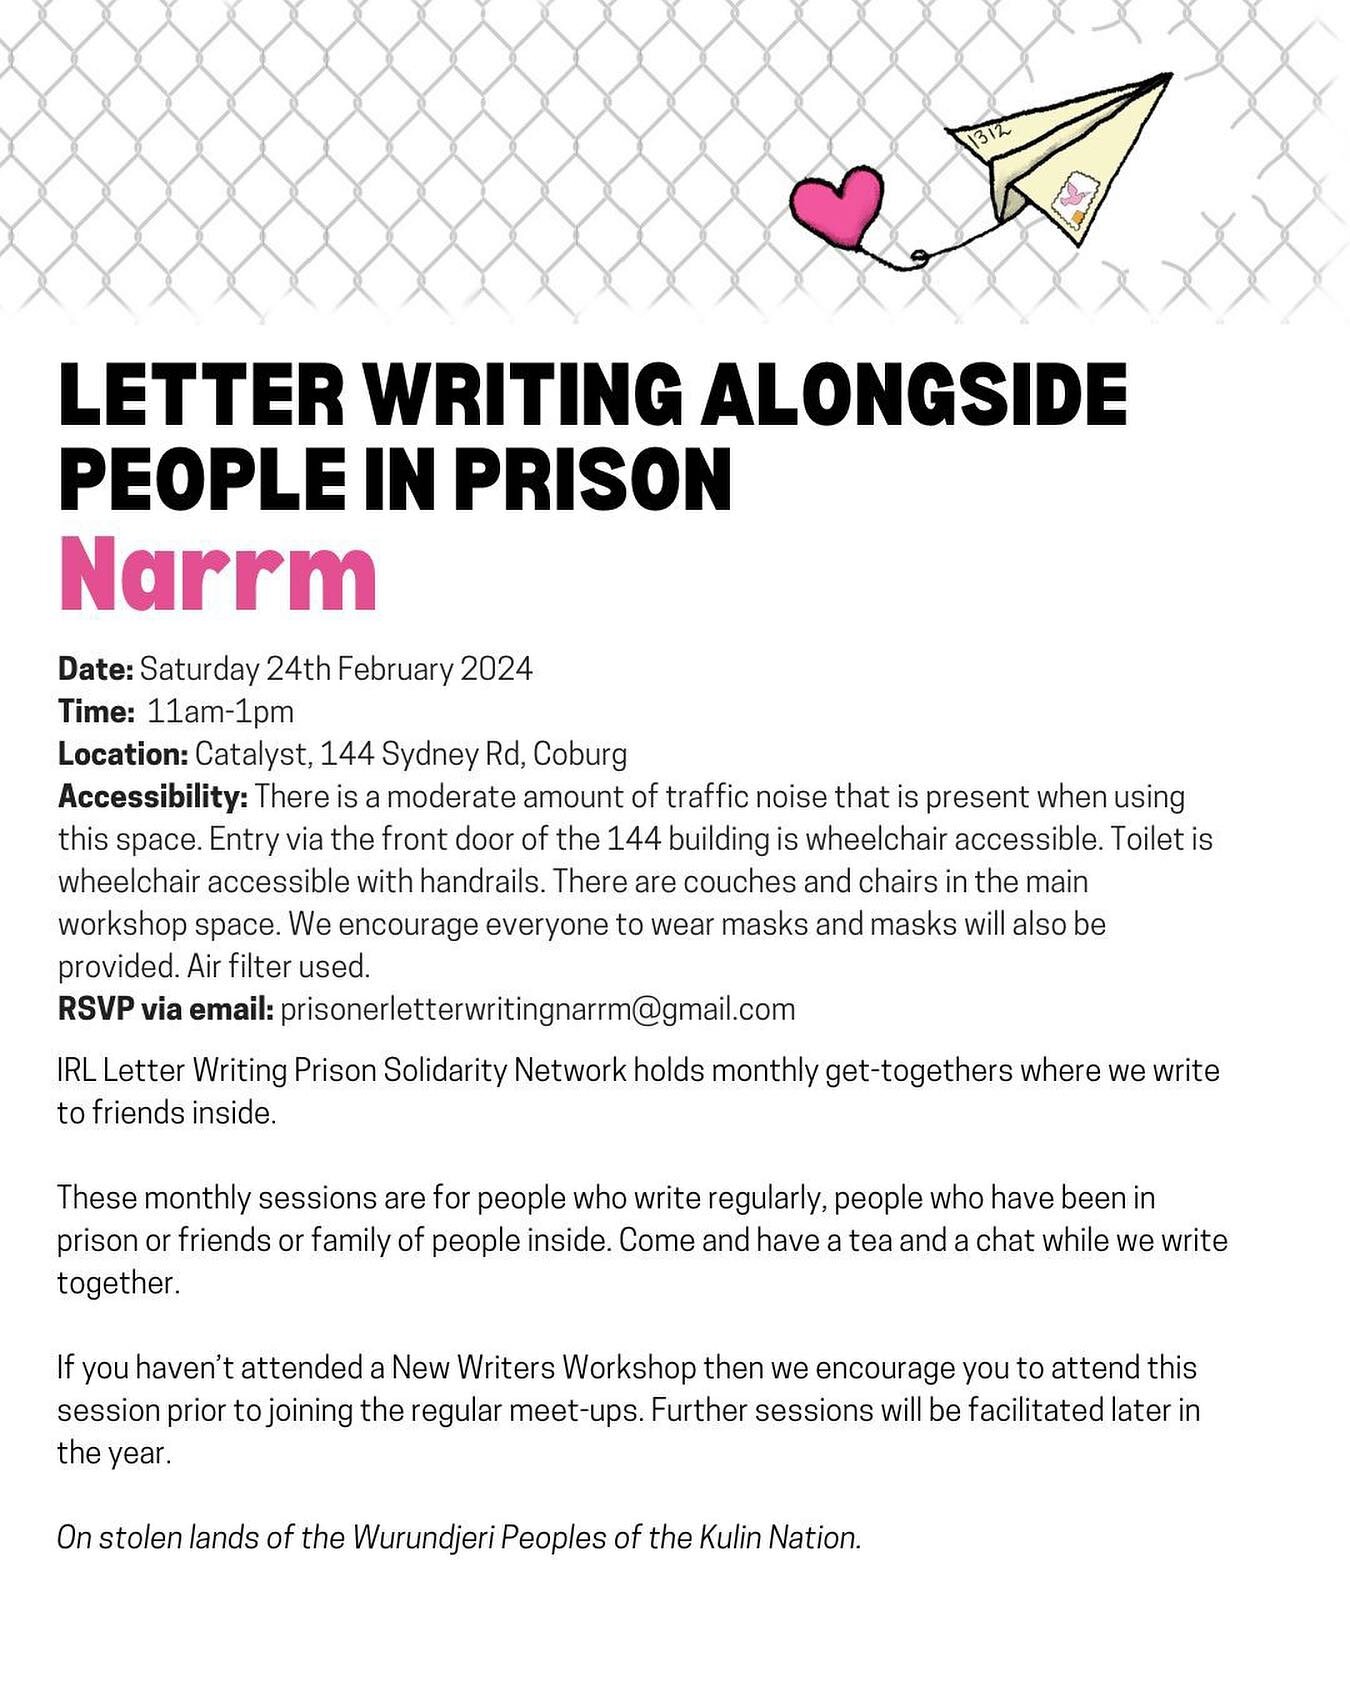 LETTER WRITING ALONGSIDE PEOPLE IN PRISON Narrm 

Date: Saturday 24th February 2024 
Time: 11am-1pm Location: Catalyst, 144 Sydney Rd, Coburg 
Accessibility: There is a moderate amount of traffic noise that is present when using this space. Entry via